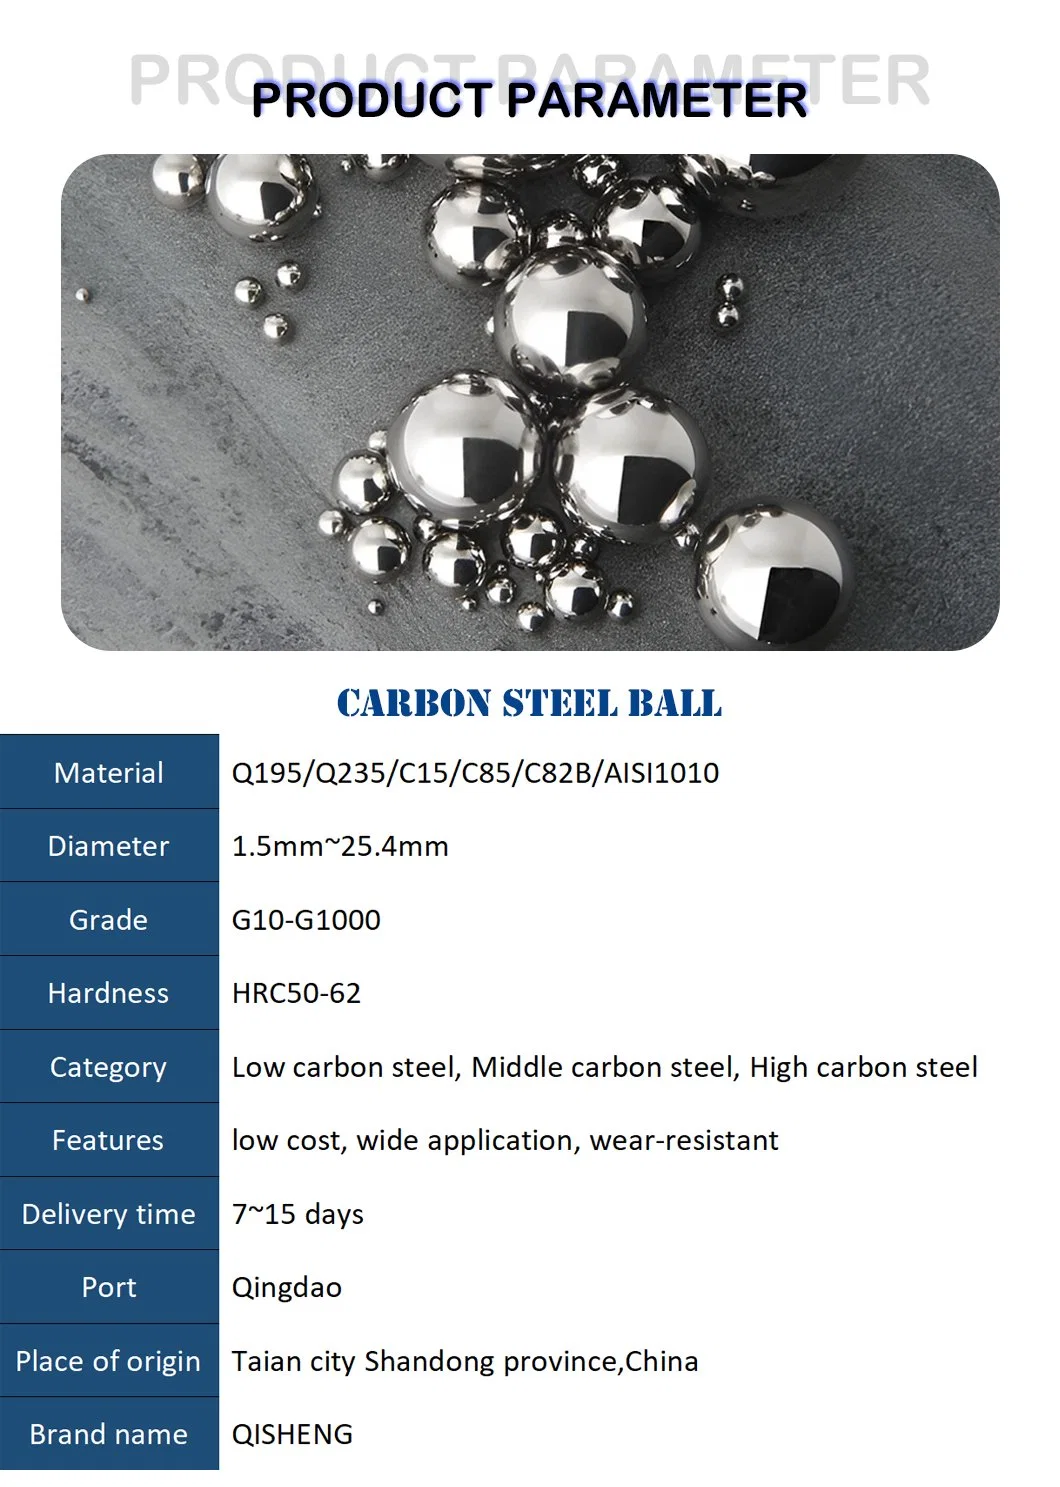 Solid Carbon Steel Ball 1.5mm-25.4mm G100 for Motorcycle Parts/Pillow Block Bearings